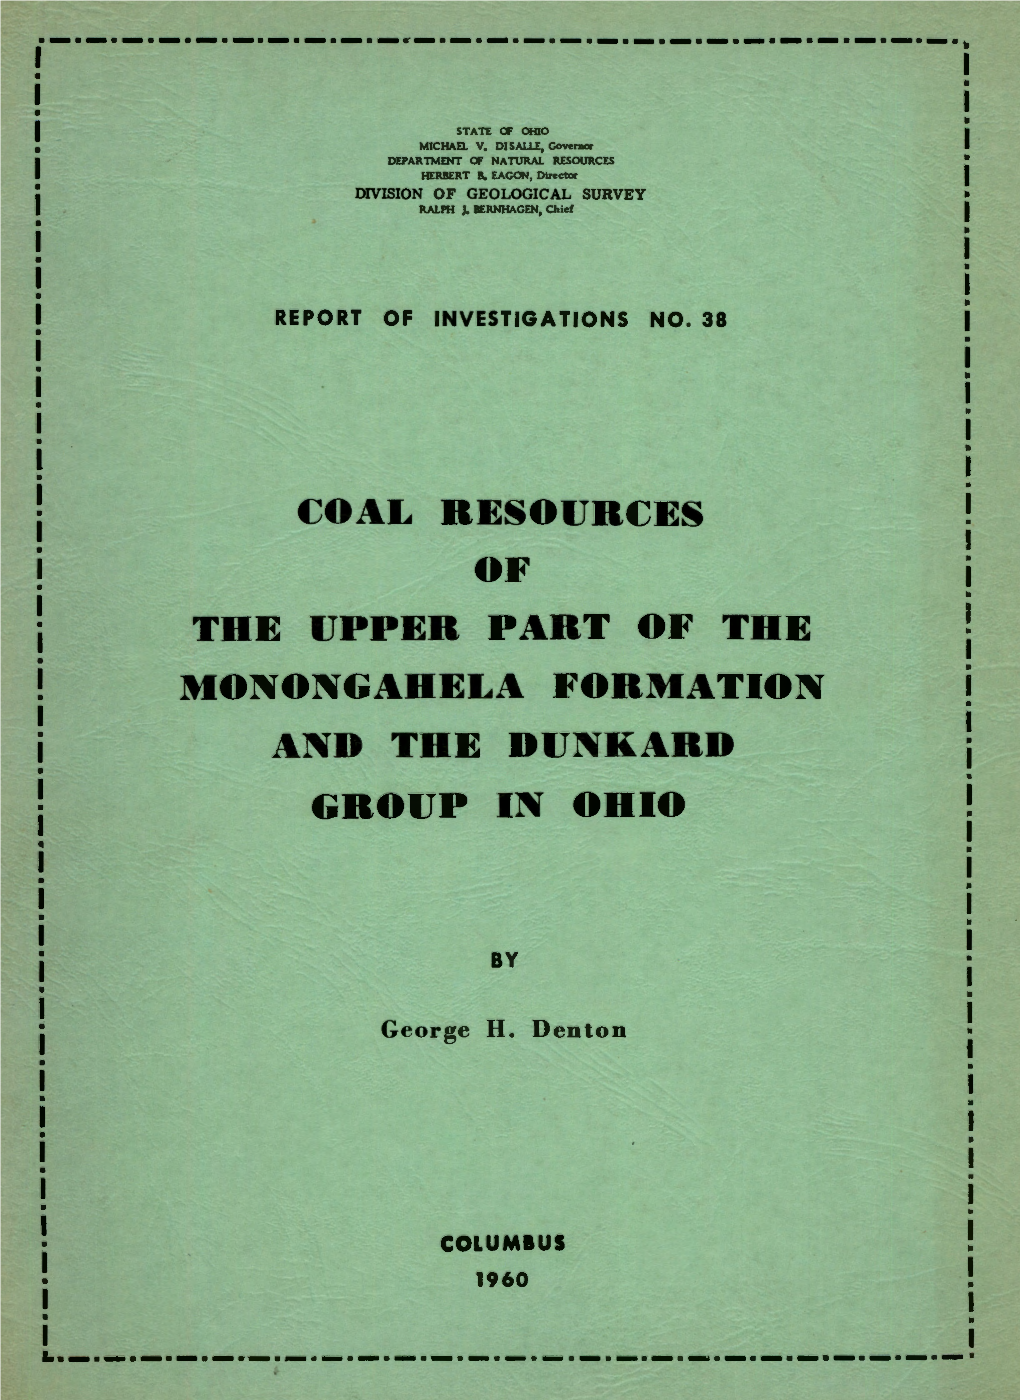 Coal Resources of the Upper Part of the Monongahela Formation and the Dunkard Group in Ohio